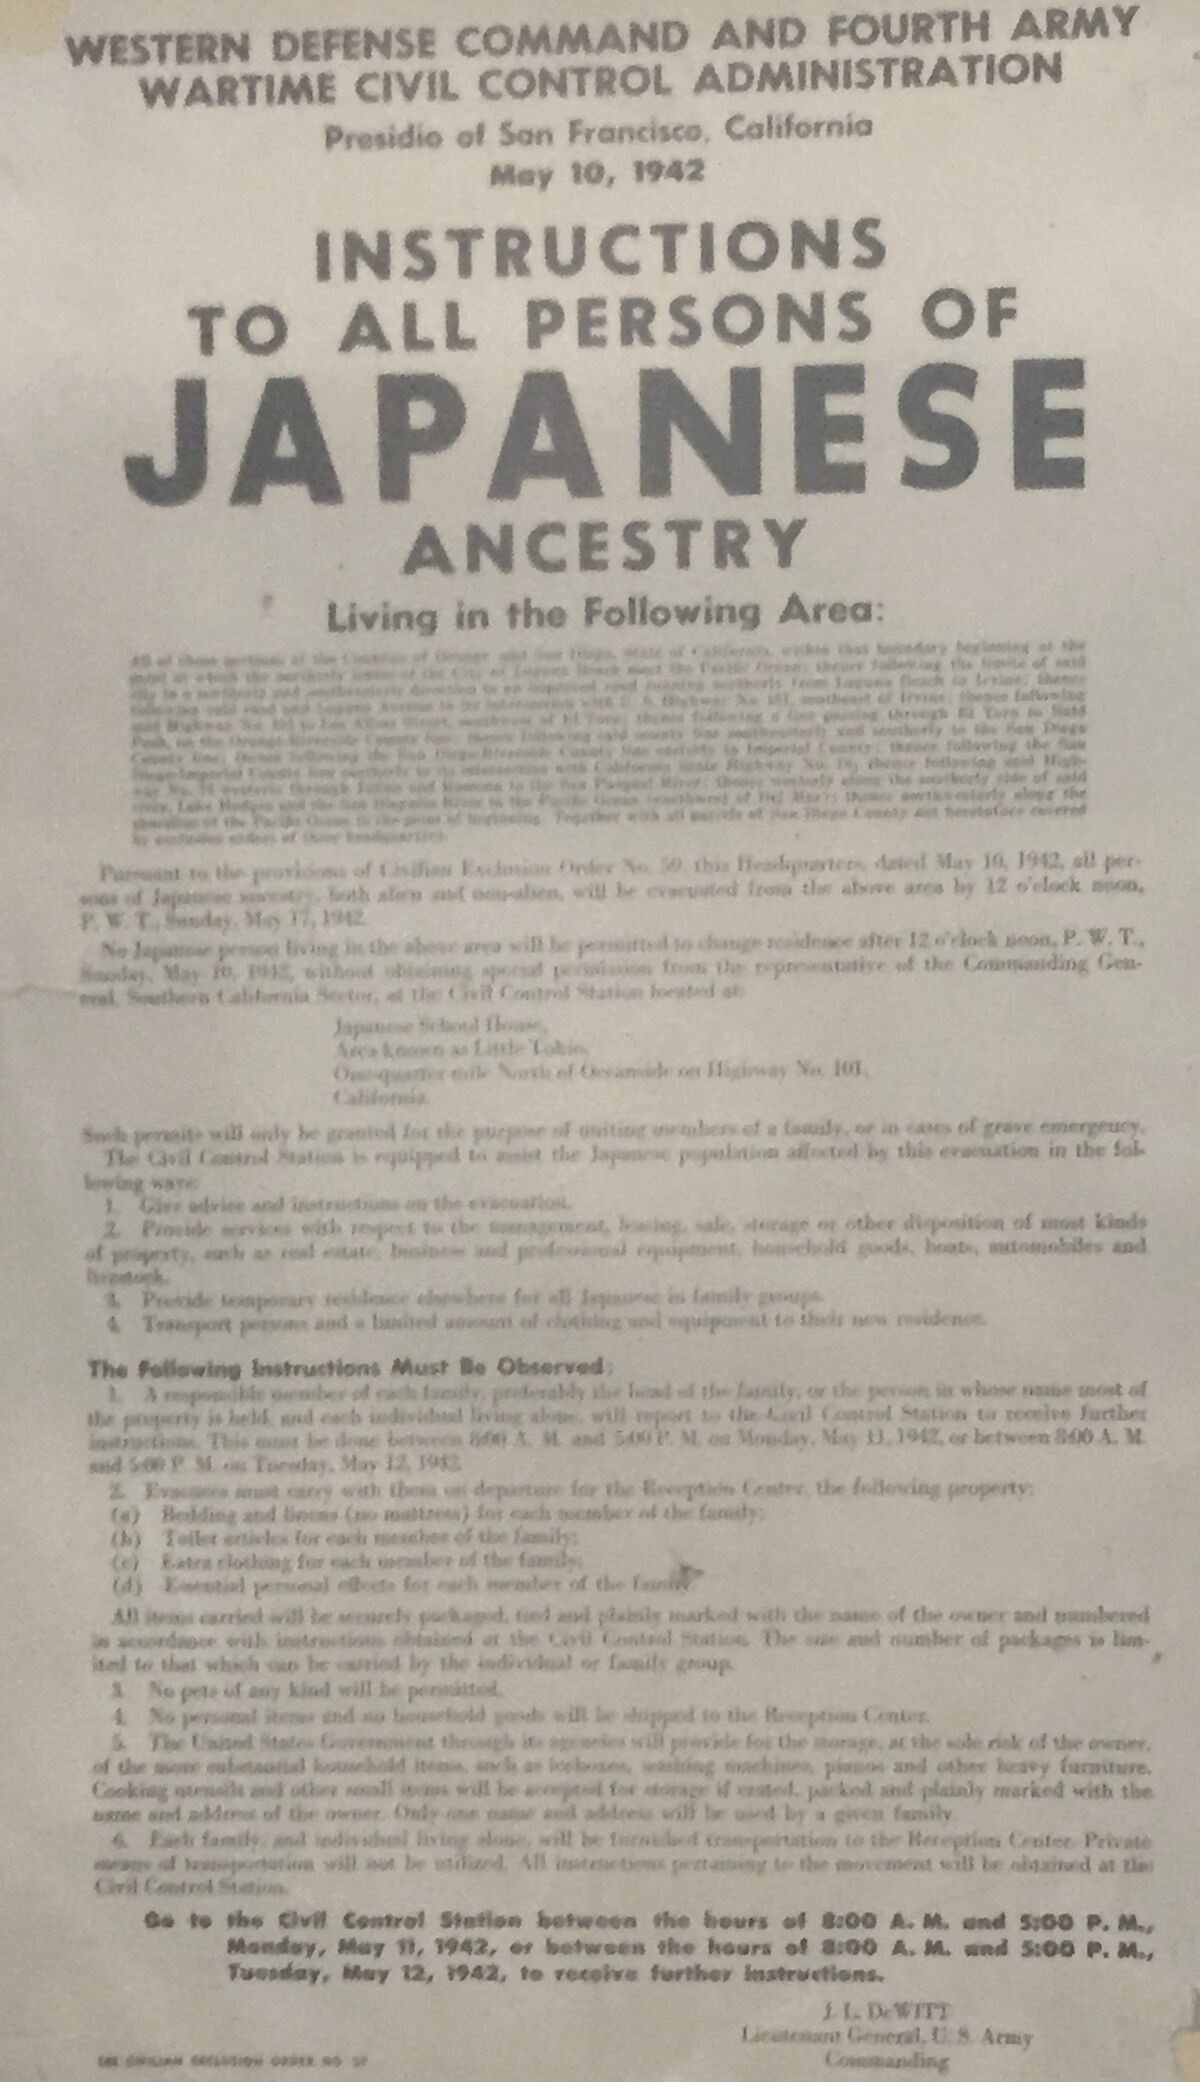 Executive Order 9066 — signed by President Franklin Delano Roosevelt on Feb. 19, 1942 — forced the evacuation of more than 120,000 Japanese-Americans from their homes to internment camps.